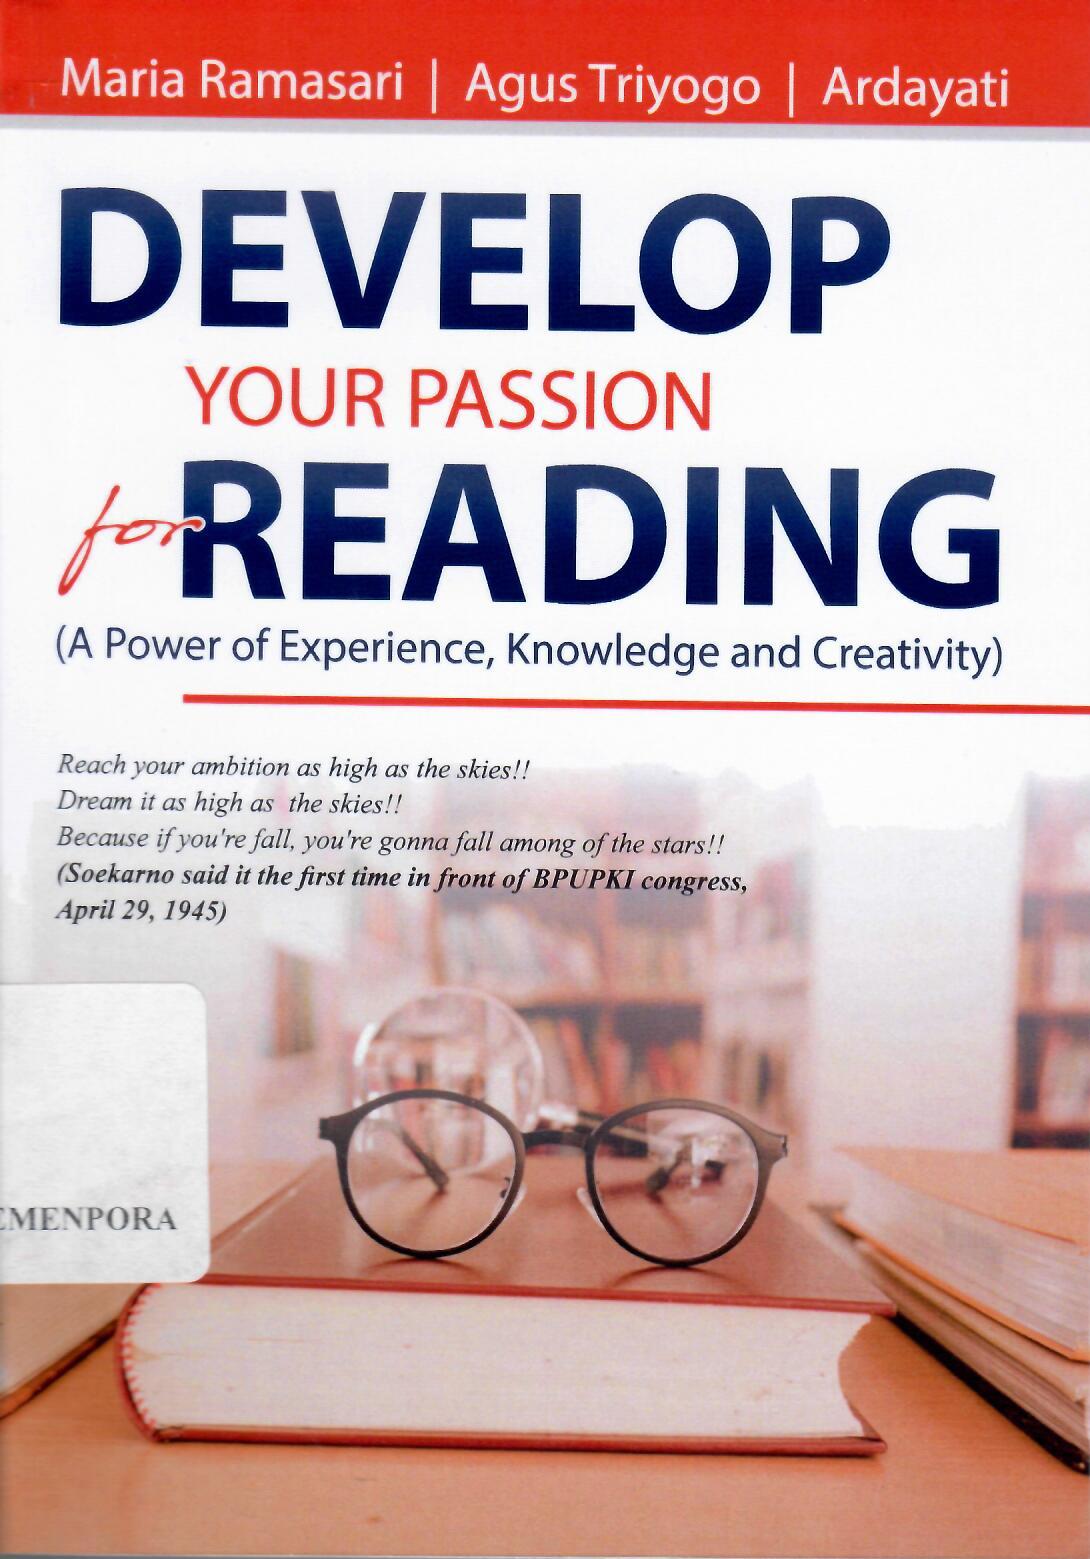 Develop Your Passion for Reading (A Power of Experience, Knowledge, and Creativity )